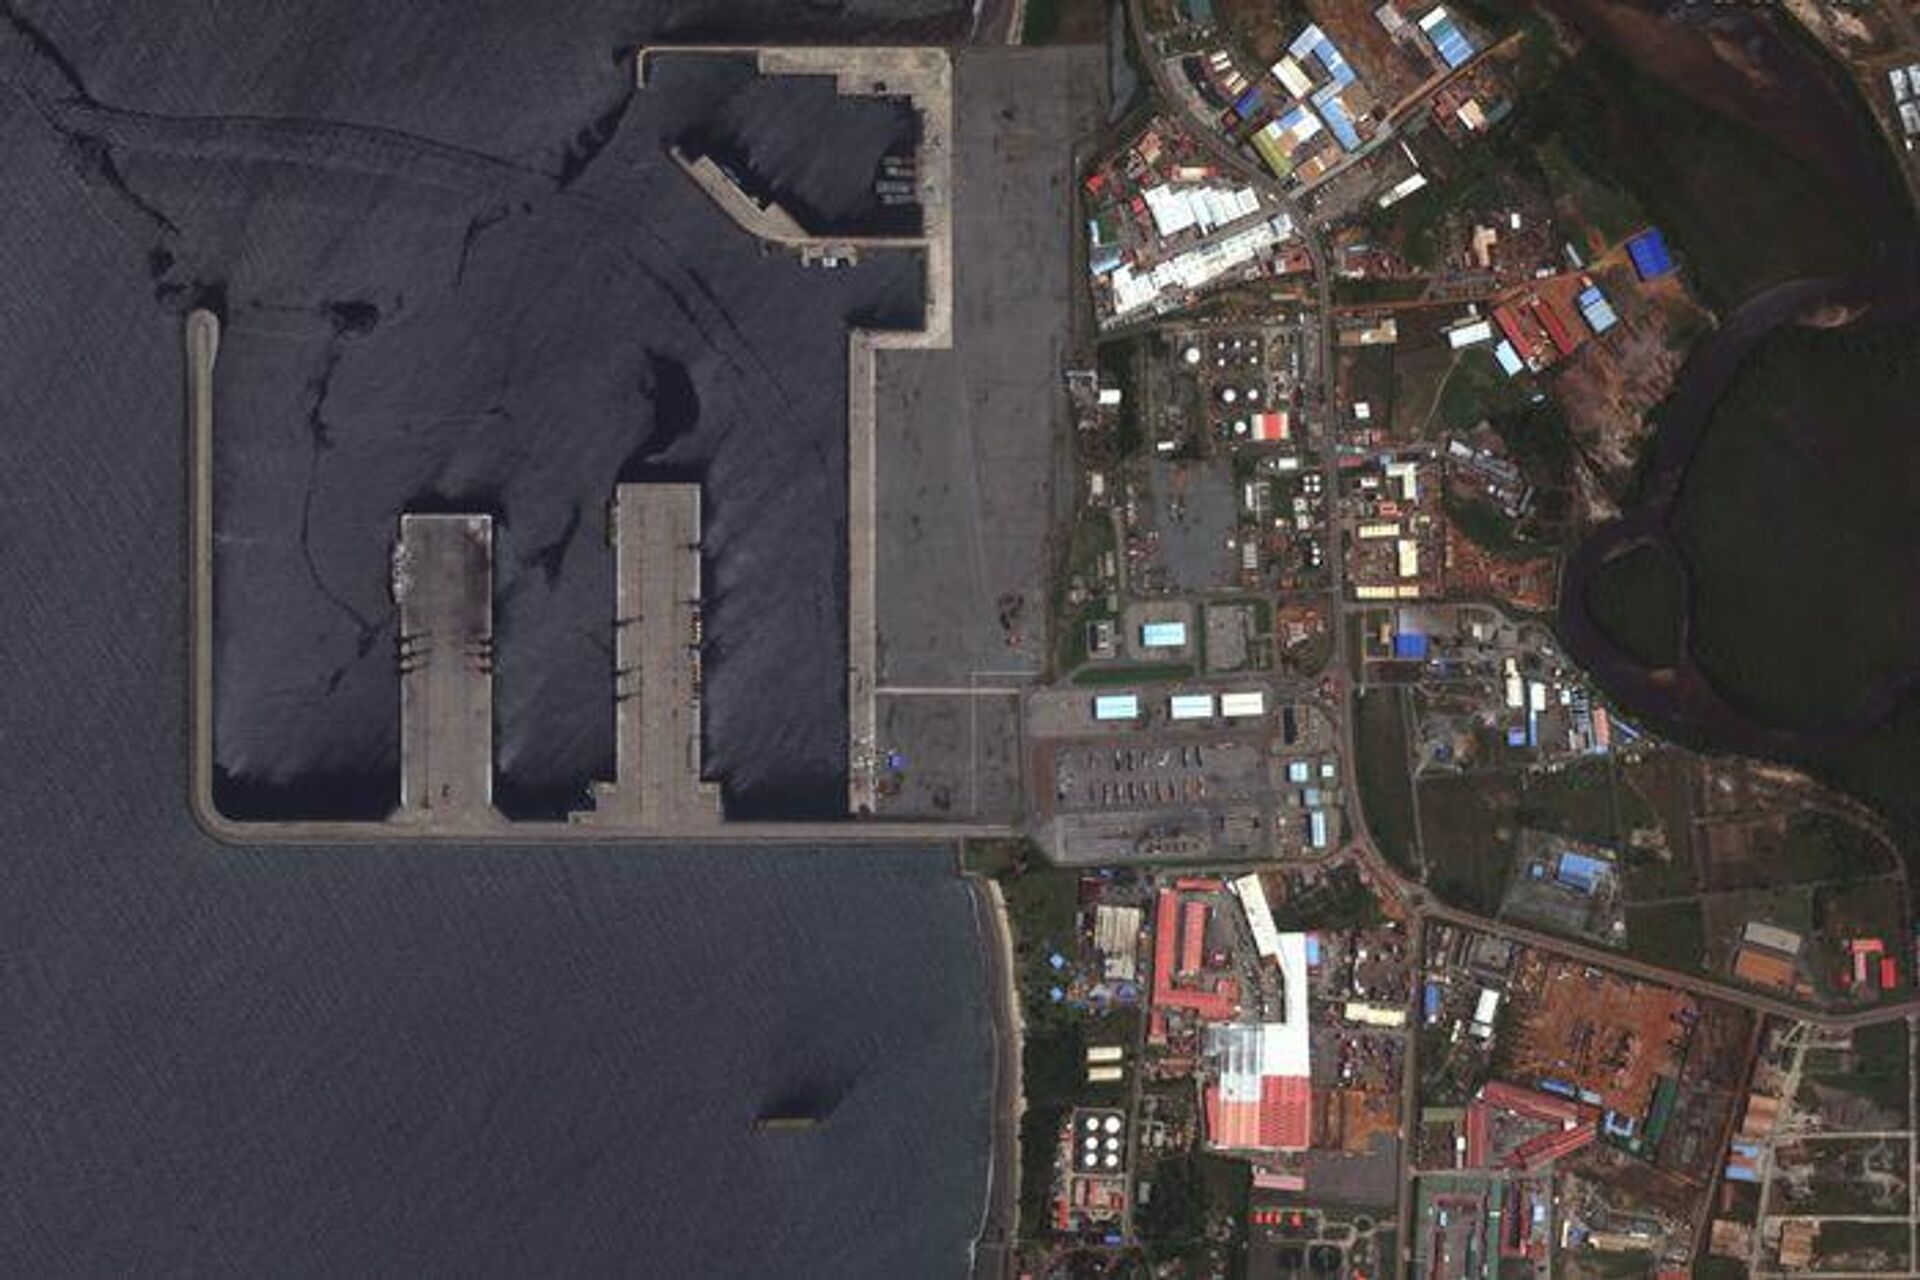 A satellite image taken earlier this year shows the Chinese-built deep-water port at Bata, Equatorial Guinea’s largest mainland city - Sputnik International, 1920, 06.12.2021